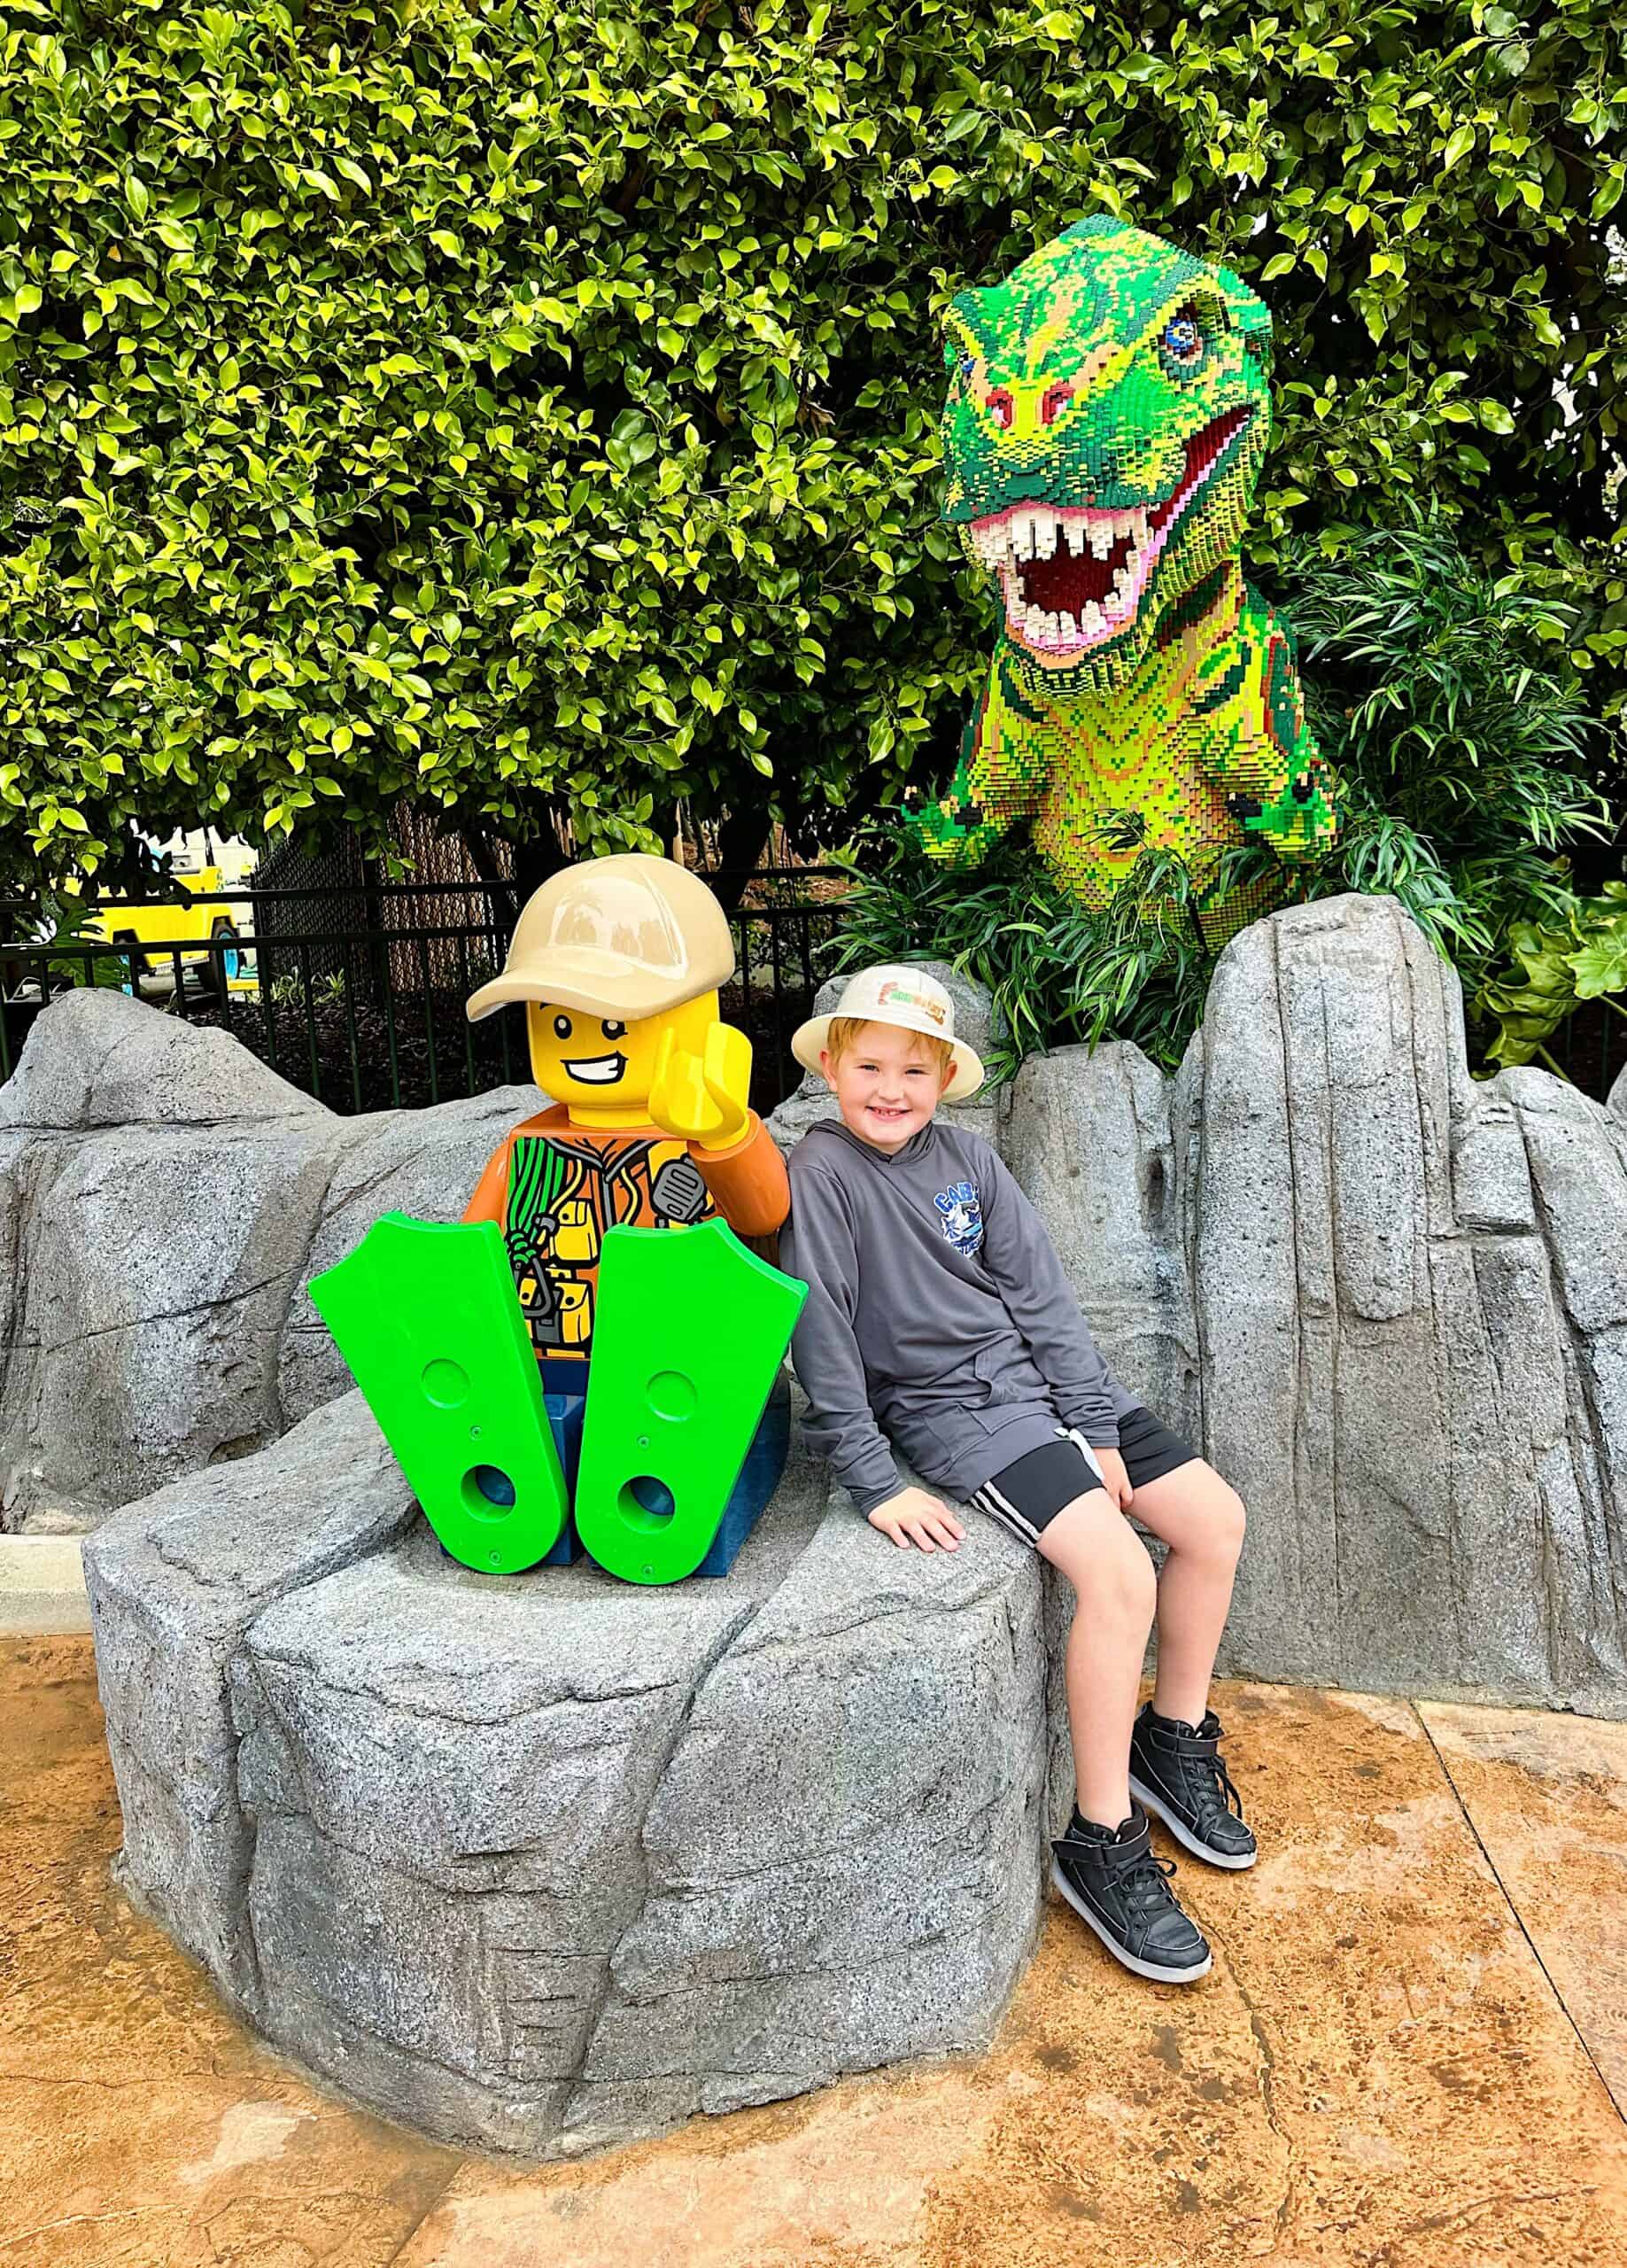 Checking out Legoland's new rides